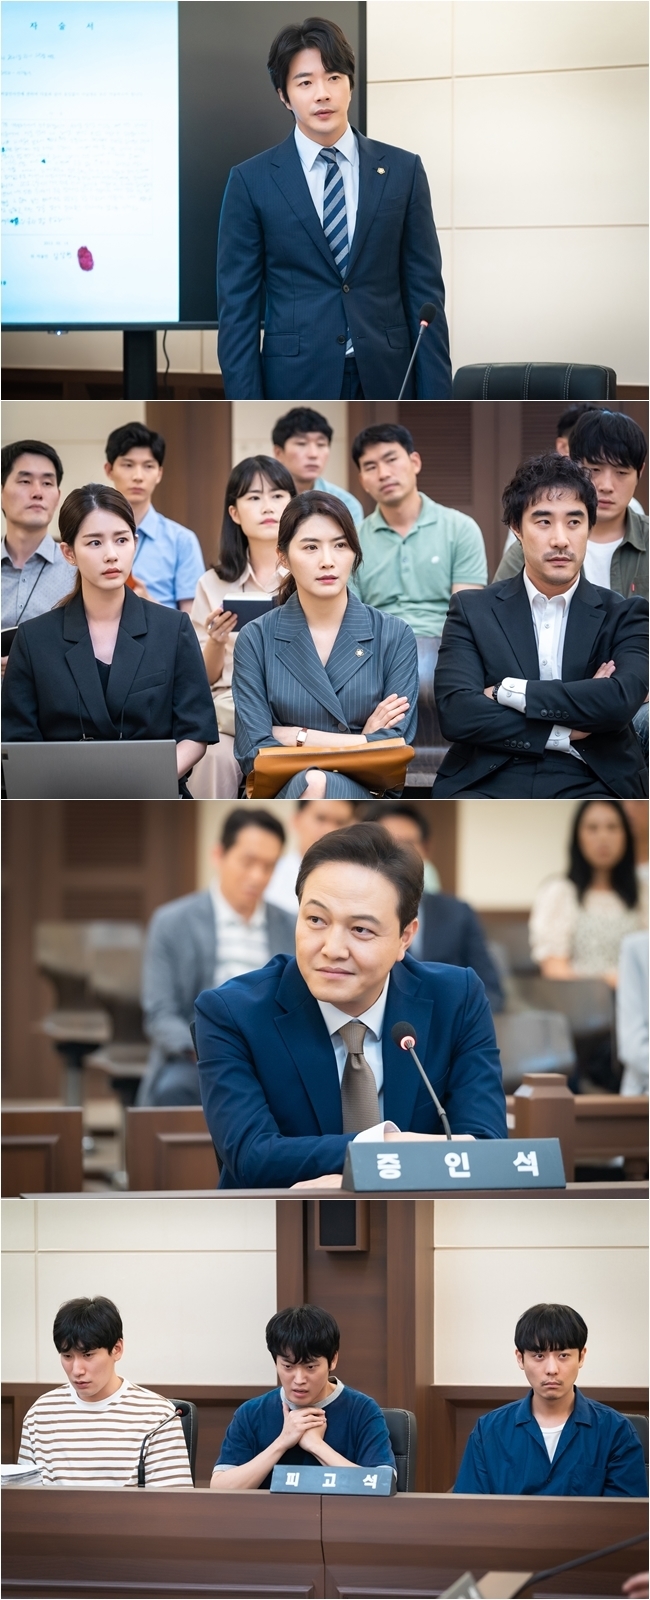 Kwon Sang-woo and Jung Woong-in face each other.SBSs Golden Earth Drama Fly, Gaecheon Yong (playplayed by Park Sang-gyu/directed by Kwak Jung-hwan) unveiled the New Trial trial of the Trio case in Samjeong City on November 13.Expectations are high that Park Tae-yong (Kwon Sang-woo) and Park Sam-soo (Bae Sung-woo), who went head-to-head to reverse the solid plate designed by those who want the case to be buried, will be able to pull out the card of the spleen that will reverse the situation.Trio, who chose the agreement, realized that he could not overcome the trauma of the past with financial compensation, and decided on a new trial that was not easy.Park Tae-yong and Park Sam-soo, who jumped into one authenticity, started a straight line to overturn the plate, but the plan of the forces to end the case was not clear.The real criminals disappeared, and a tough fight was foreseen when Judge Cho Gi-soo (Cho Seong-ha), who had misjudged at the time, was named chief justice of the Supreme Court.The released photo raises questions about the Trio New Trial trial in Samjeong City, and the prosecution and police, who had been blinded by the evidence of apparent innocence in the case record, have been revealed.His anger is felt in the appearance of Park Tae-yong, who shoots a flame eye toward Innocent Witness.Park Sam-soo, Lee Yu-kyung (Kim Joo-hyun) and Hwang Min-kyung (Anshiha) are also nervous about the trial that flows smoothly as expected.On the other hand, Jang Yoon-seok (Jung Woong-in) sitting in the Innocent Witness seat with a confident expression is interesting.What is the key held by Jang Yoon-seok, who is making a meaningful smile, and his attention is focused on the blue he will bring.Here, the image of Trio in Samjung City, which is still afraid, is also caught and added to the curiosity.Whether Park Tae-yong and Park Sam-soo will be able to reverse the atmosphere, and the two-member battle for the righteousness of the two-member battle,minjee Lee